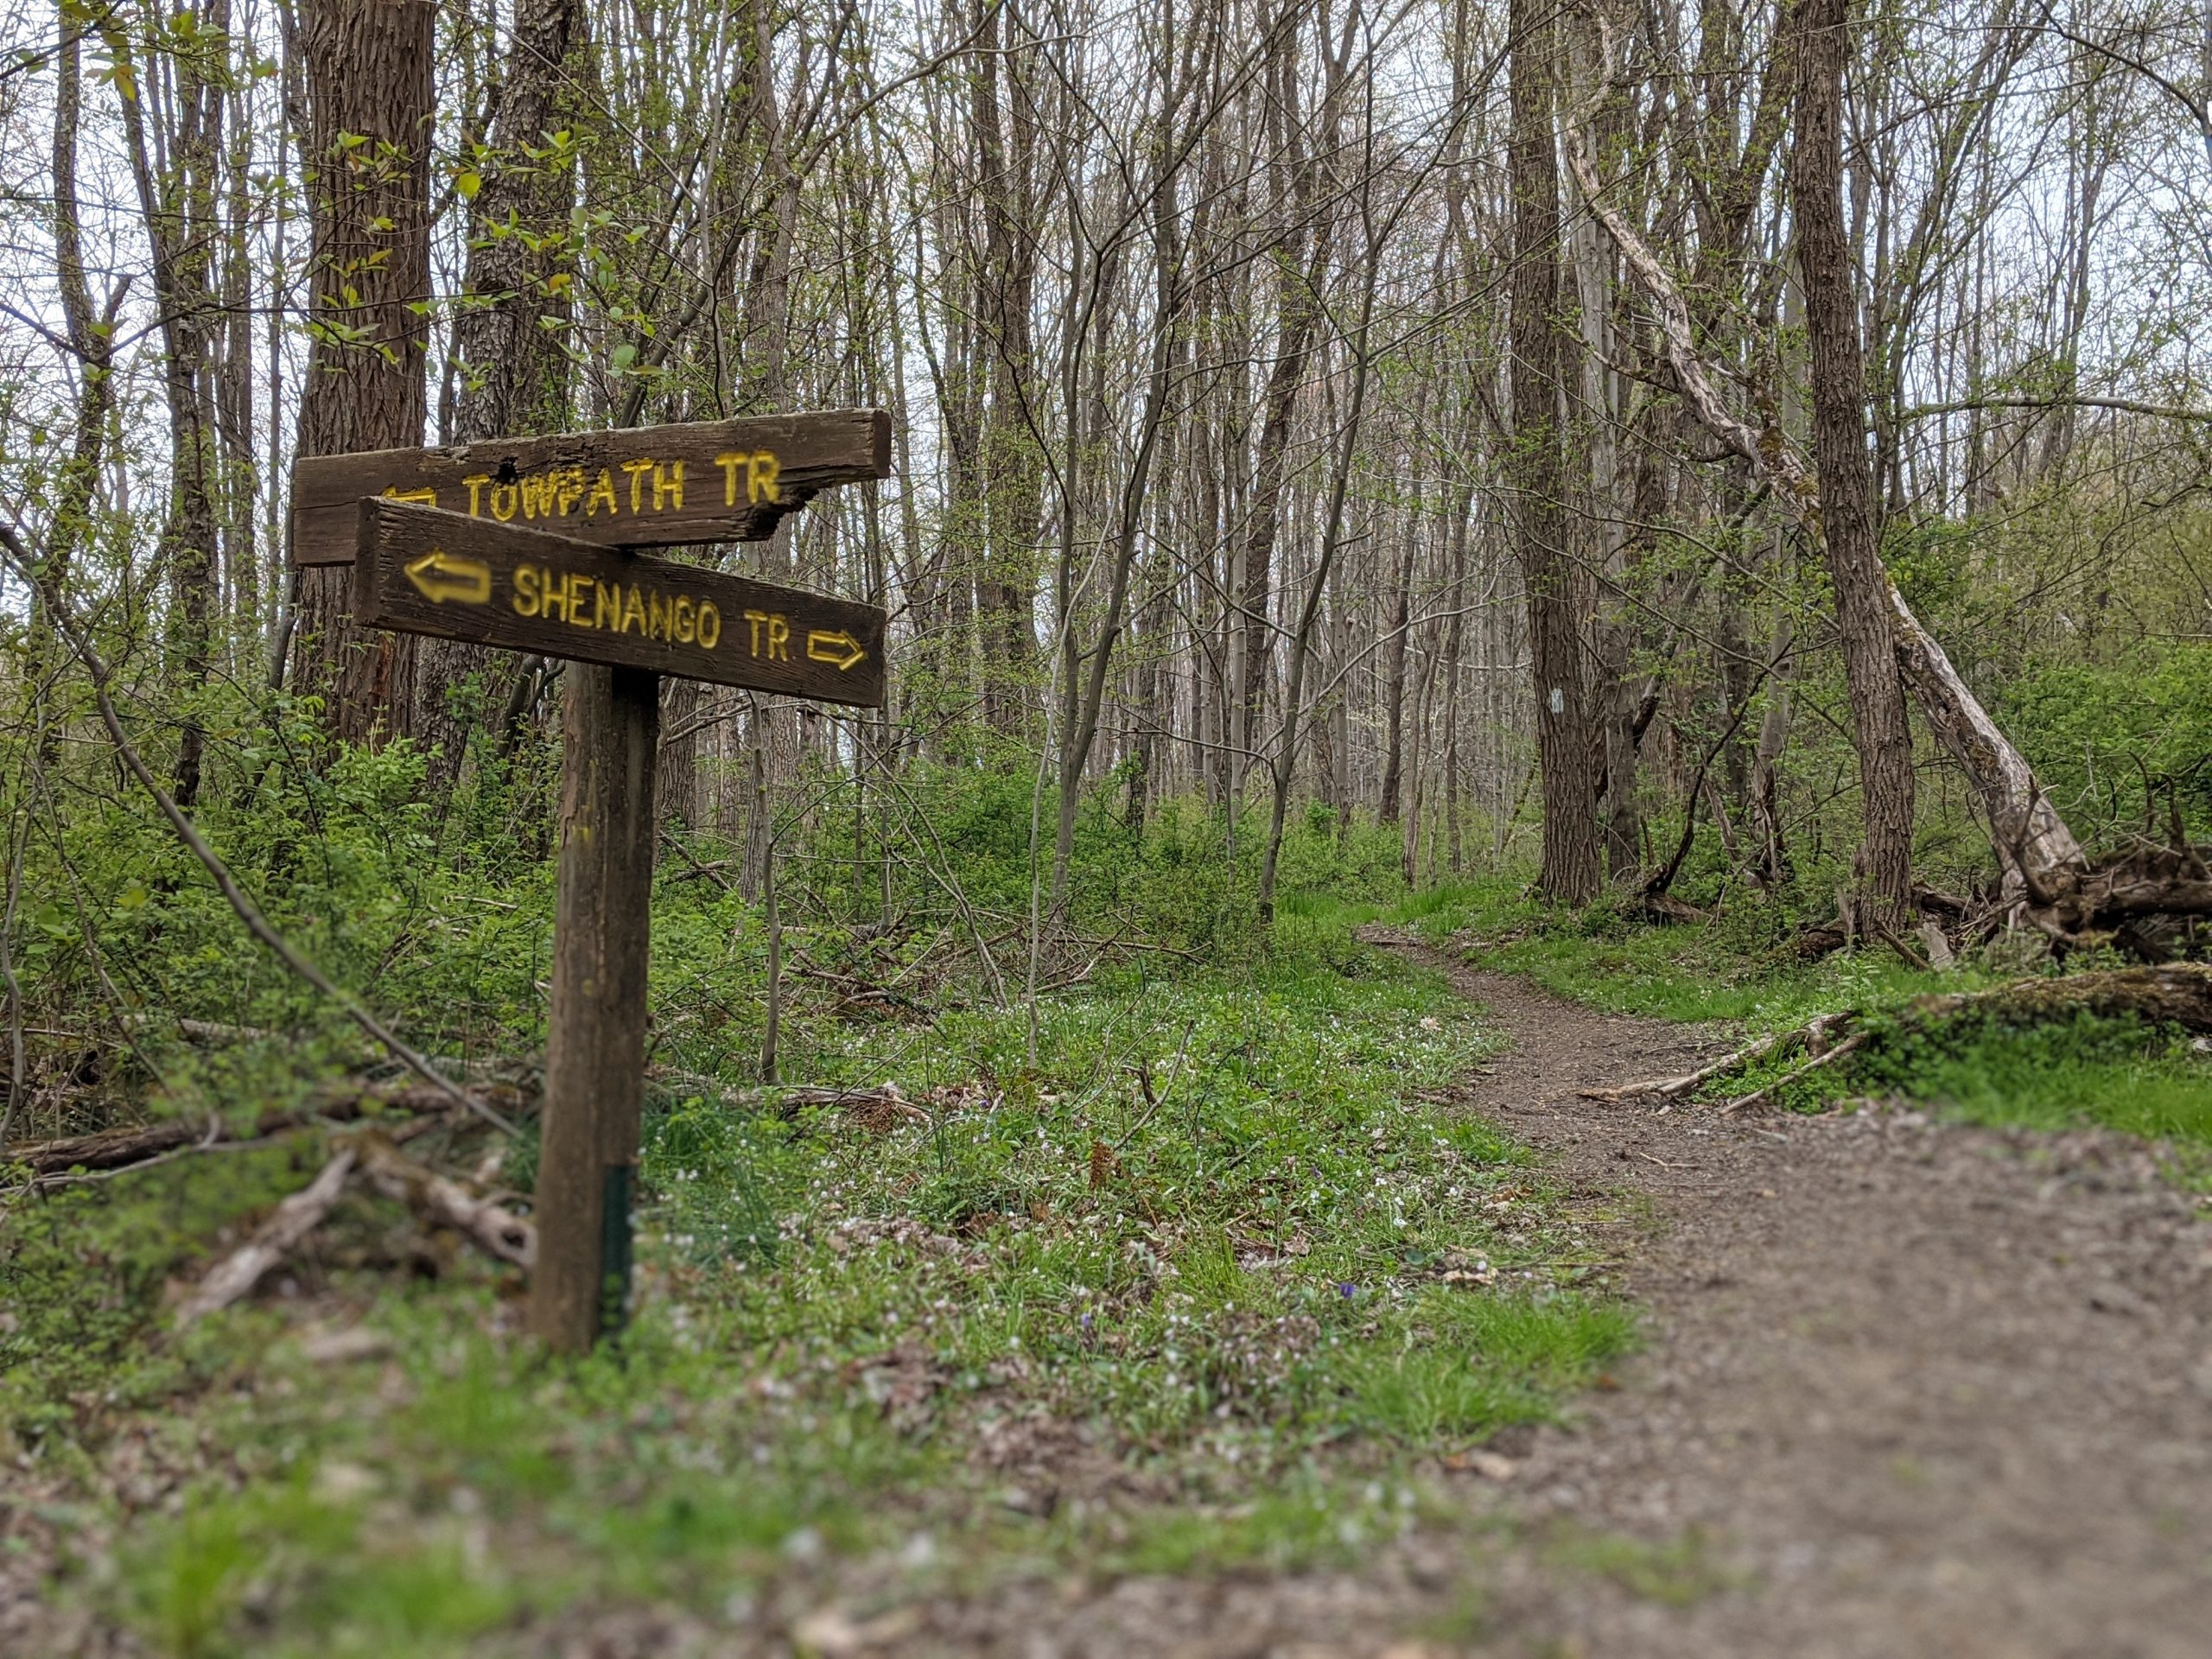 Join us for the Shenango River Watcher’s “Where the River Runs” 10-Mile Trail Race in May!